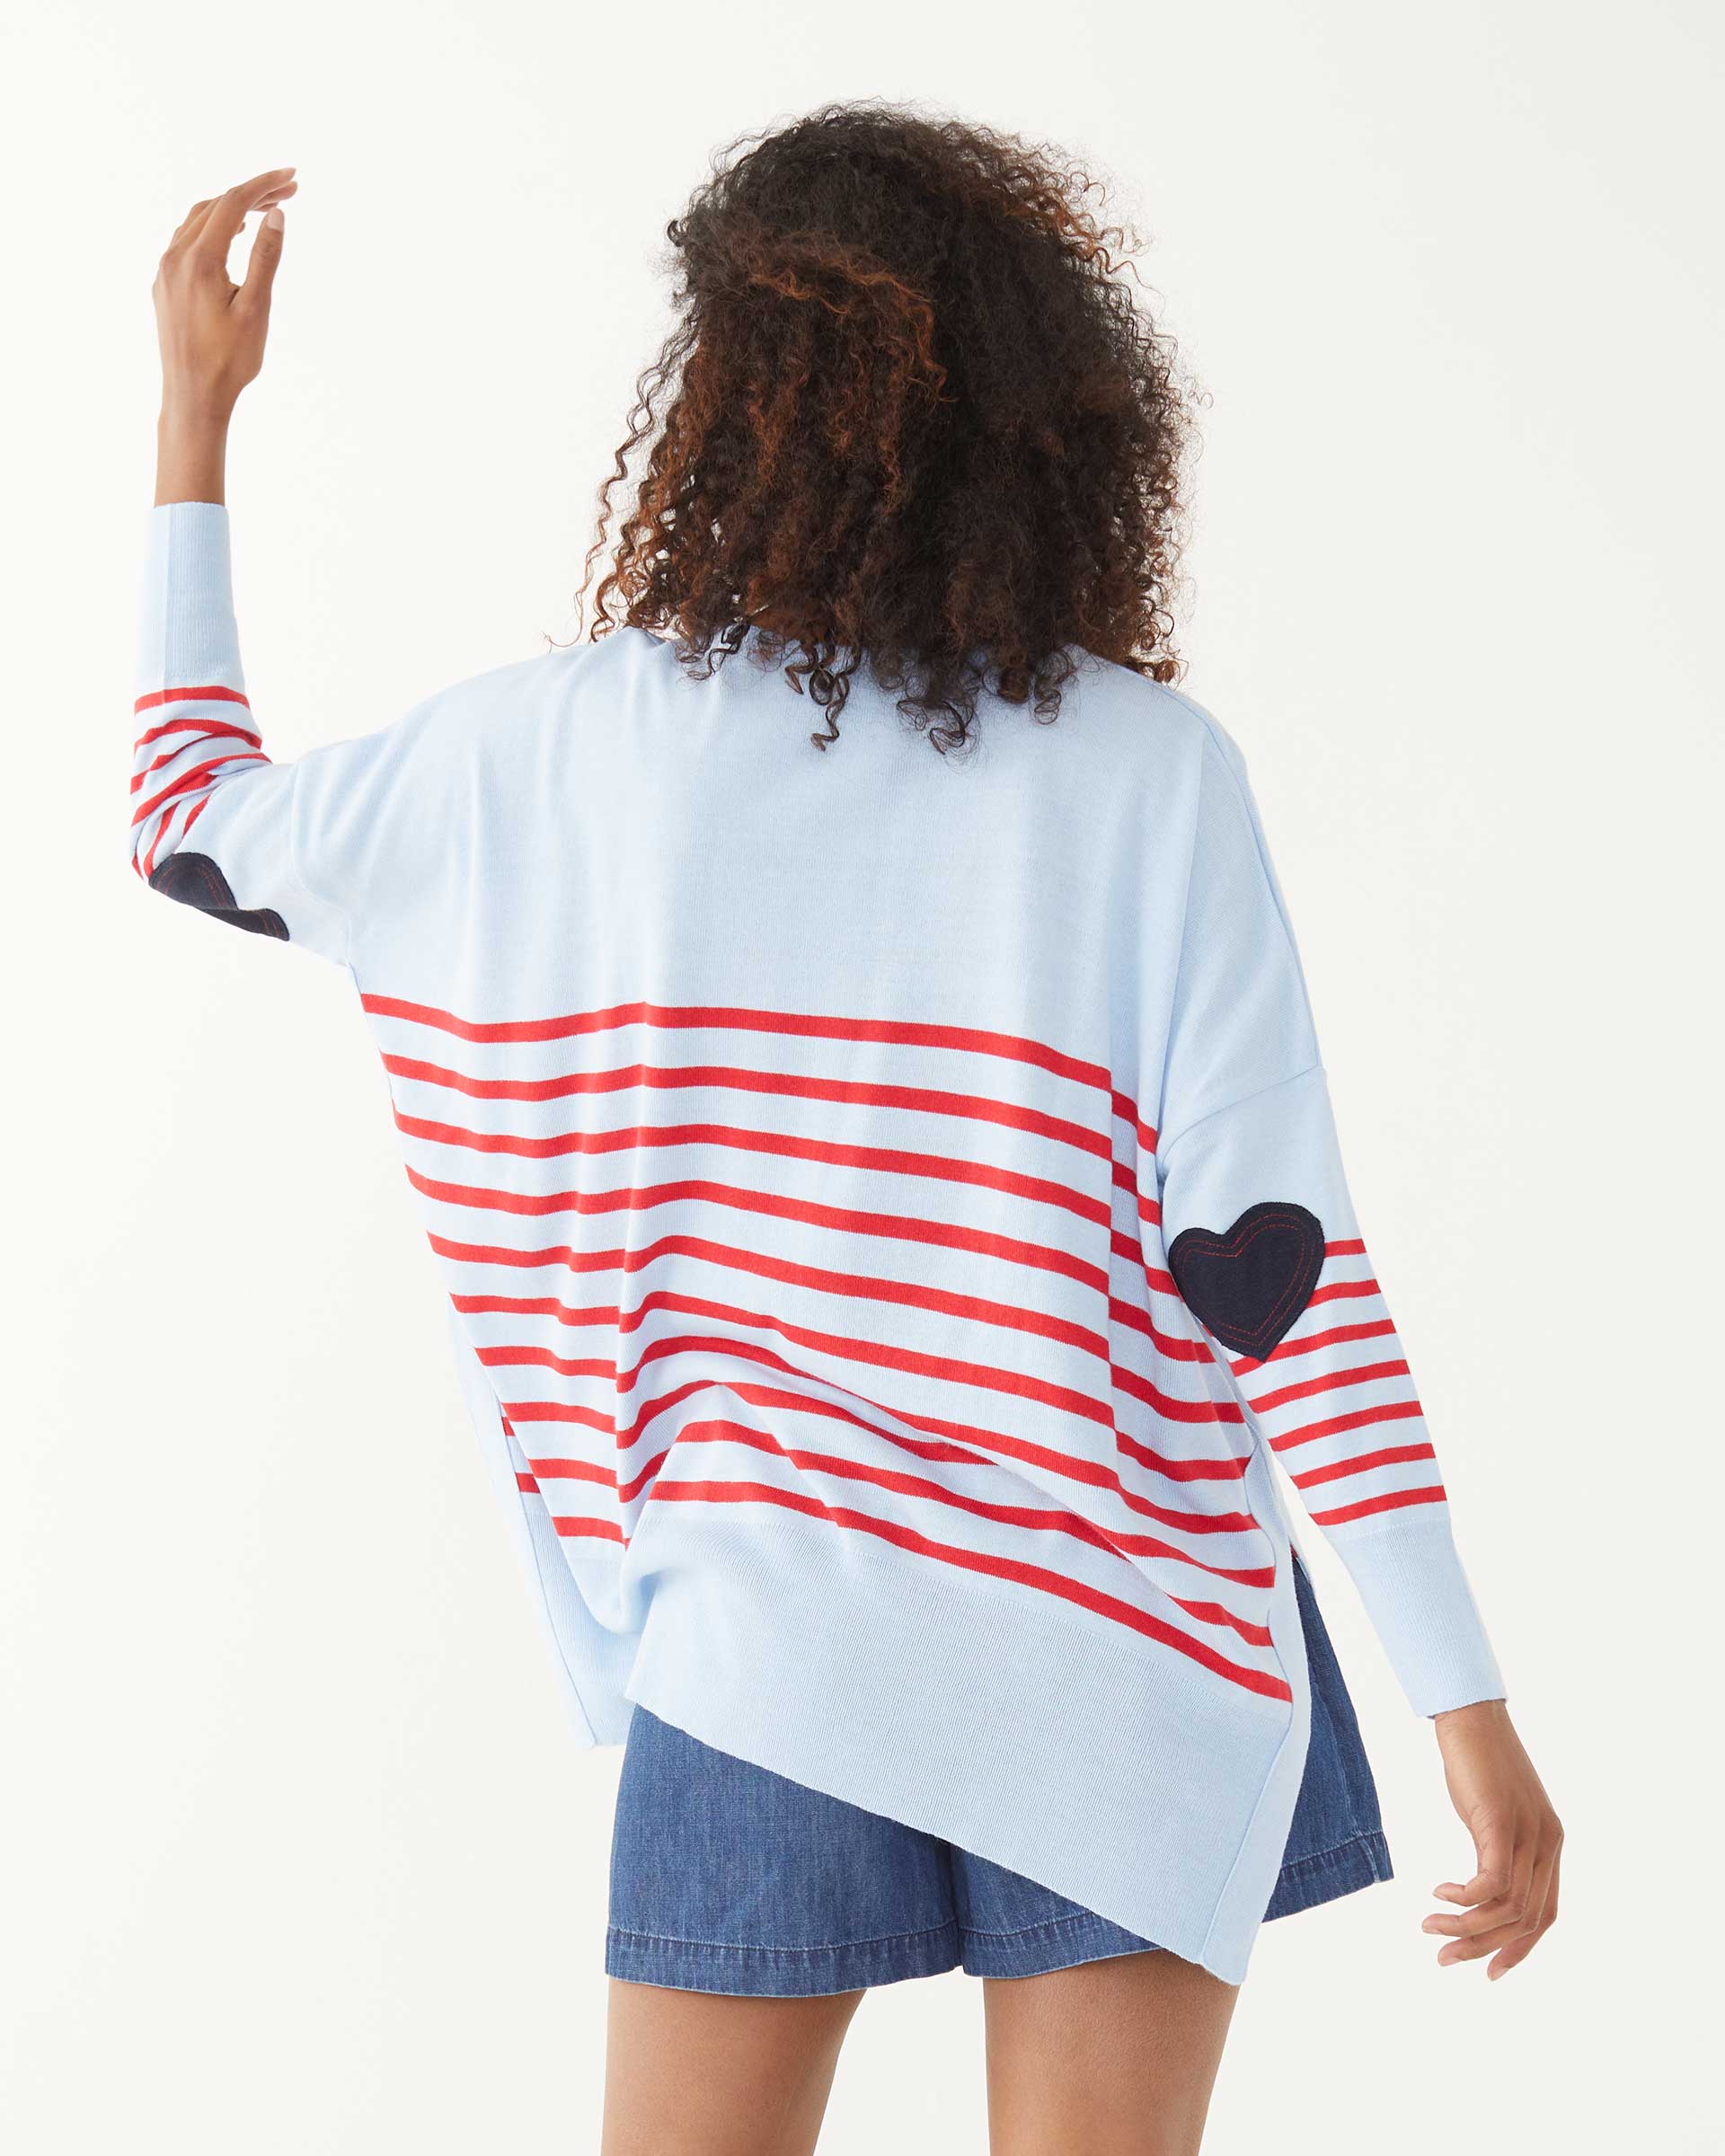 female wearing blue and red striped sweater backward with a heart elbow patch on a white background